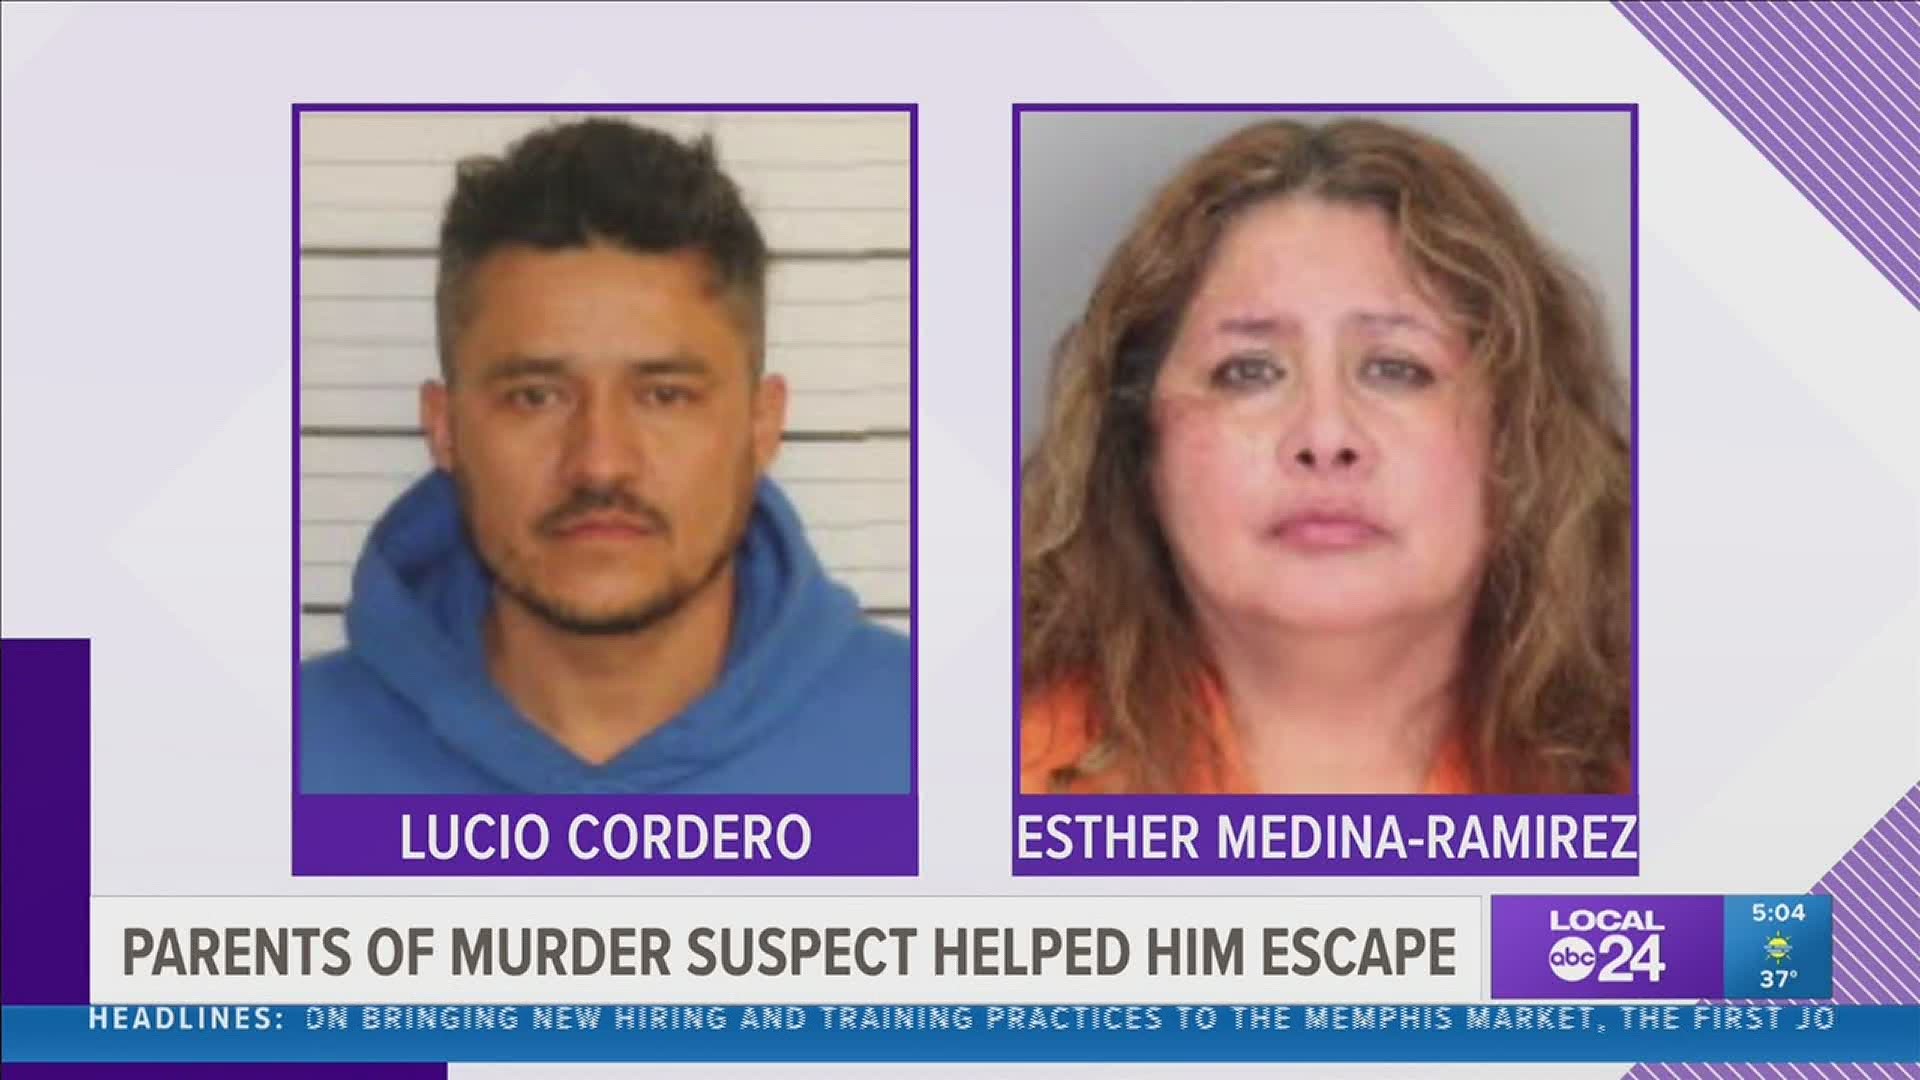 38-year-old Lucio Codero and 52-year-old Esther Medina-Ramirez are each charged with two counts of accessory after the fact. Luis Cordero, 16, is still on the run.